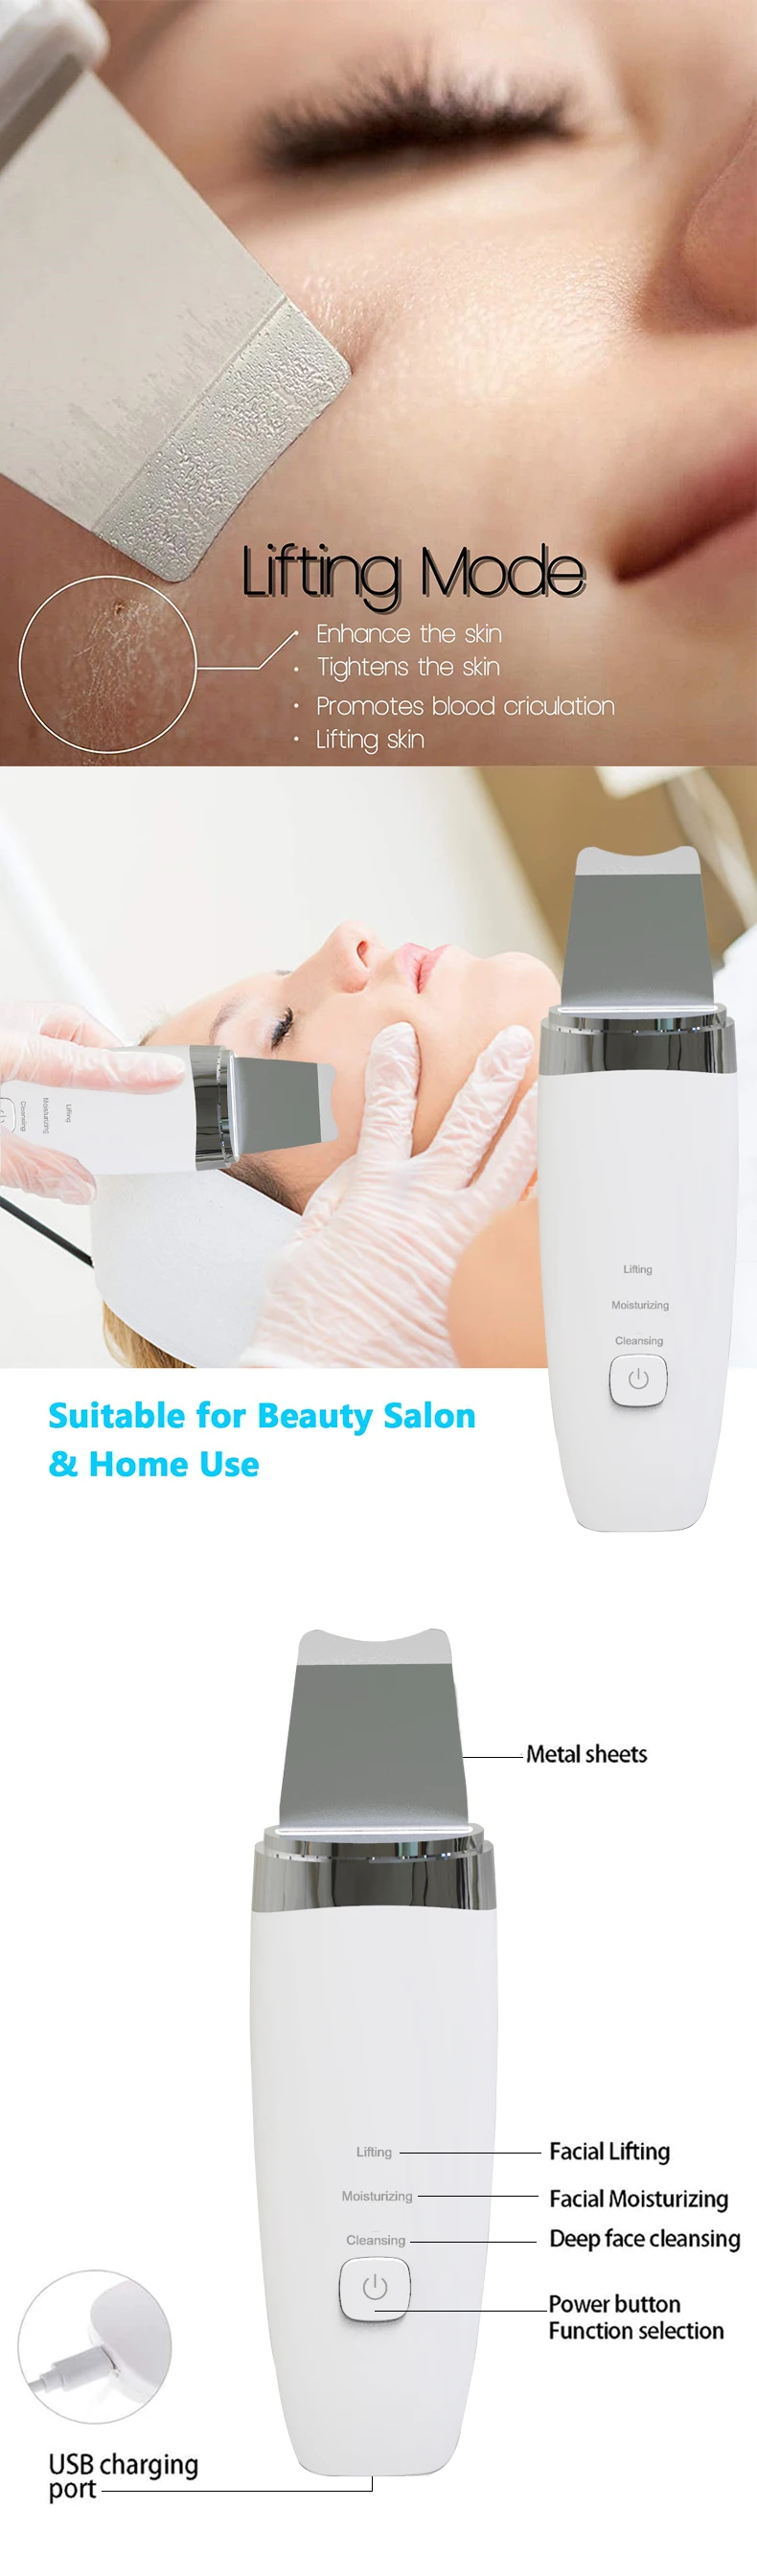 Deep cleaning Exfoliators Facial lift Skin Rejuvenation ultrasonic skin scrubber For Home Use